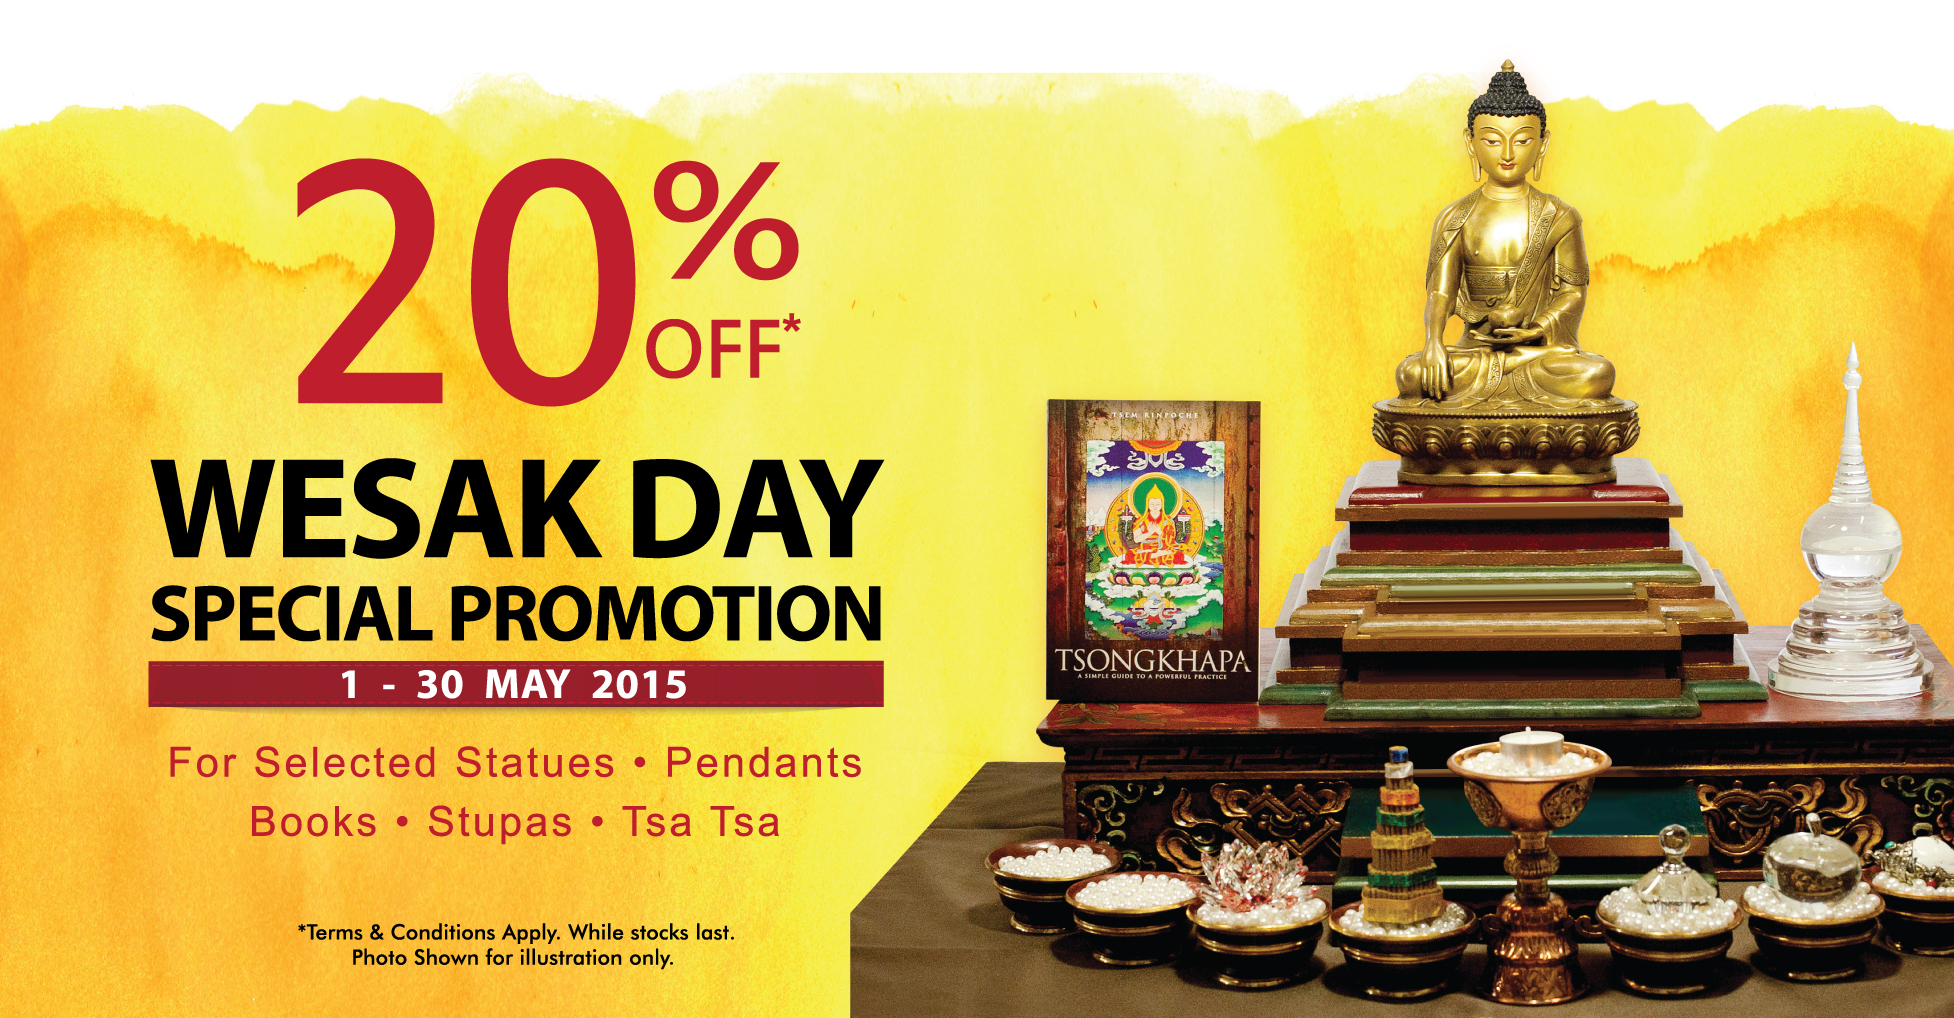 Wesak Day Special Promotion is on! « News « Shopping « Kechara